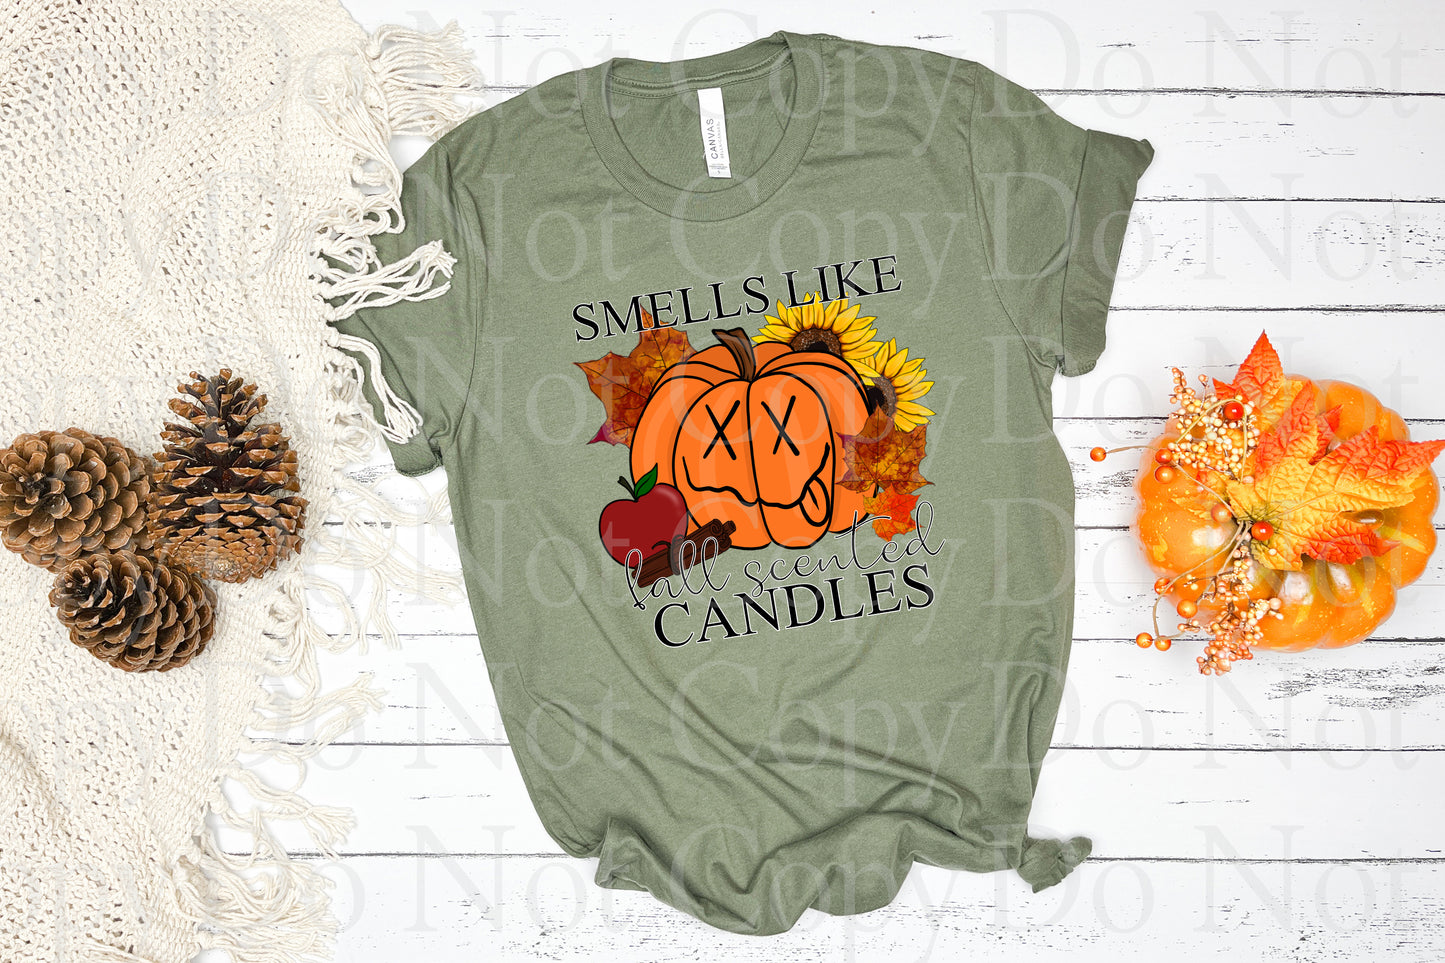 Smells like fall scented candles *DREAM TRANSFER* DTF